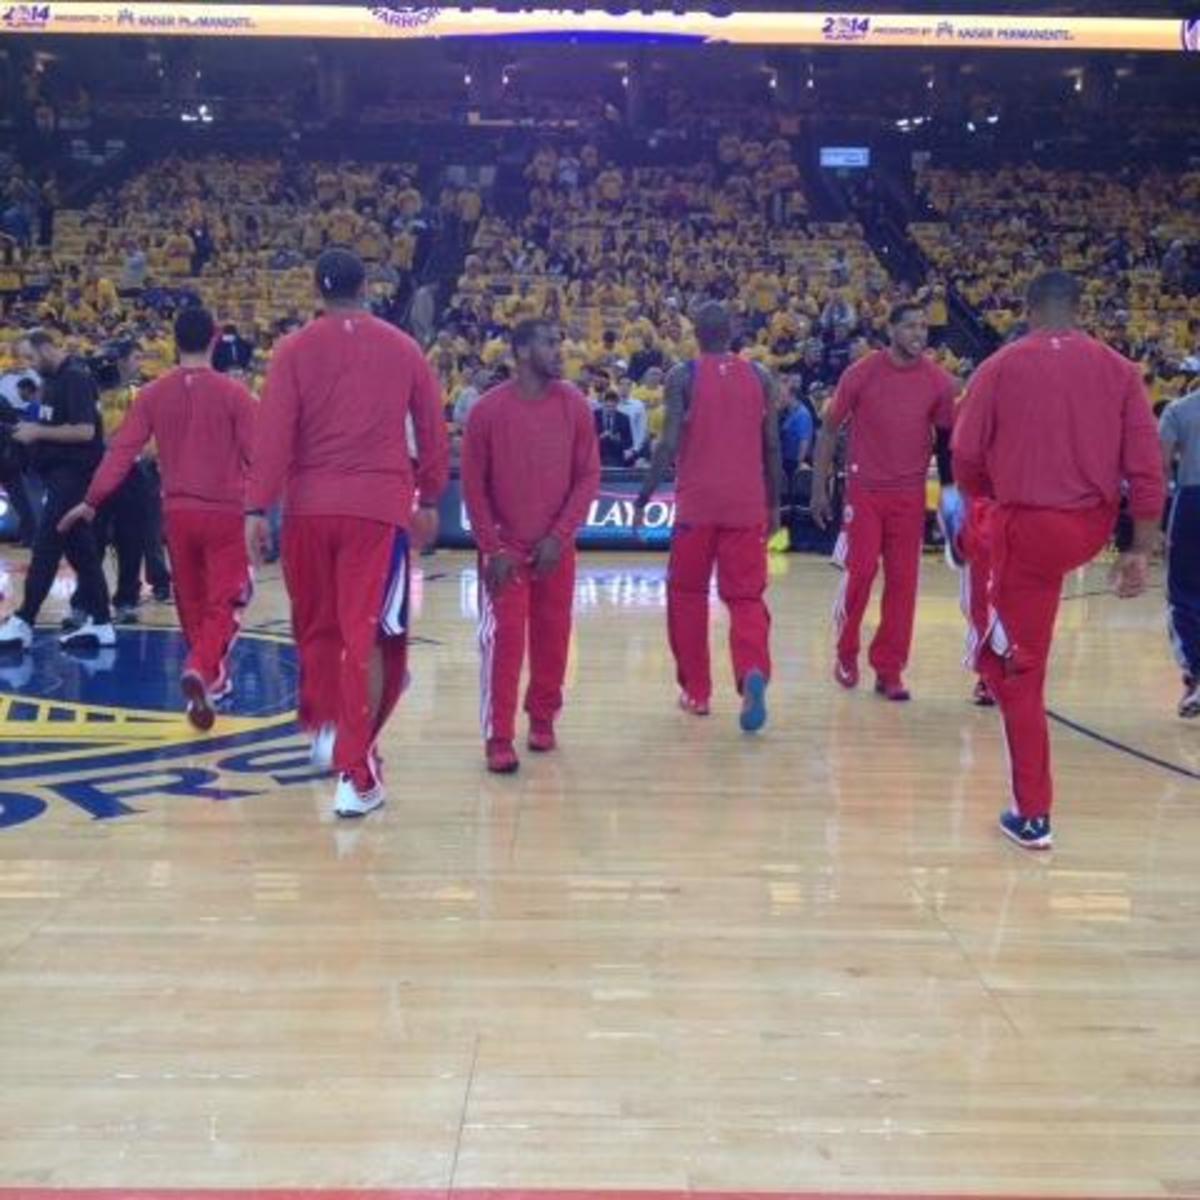 Los Angeles Clippers warming up during a pregame.